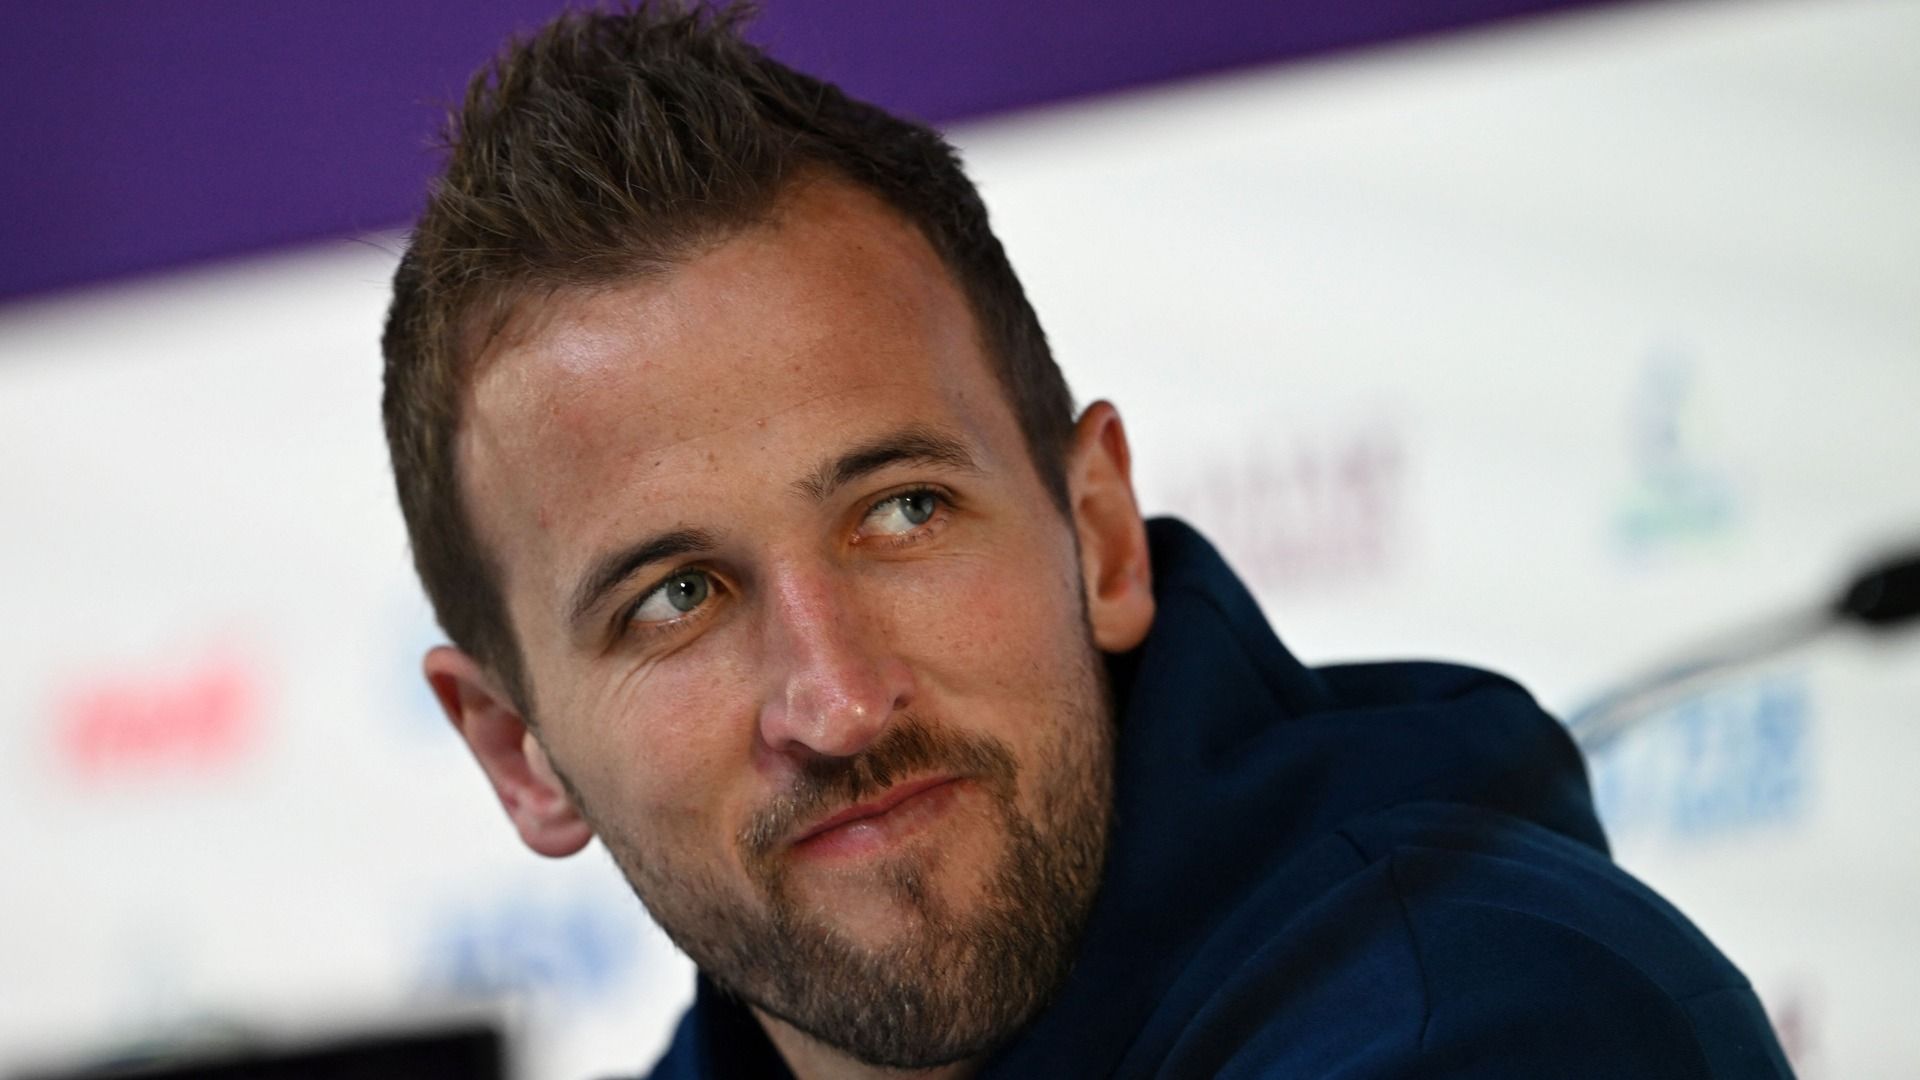 Harry Kane returns Pele praise as concern grows over the health of the Brazil World Cup legend